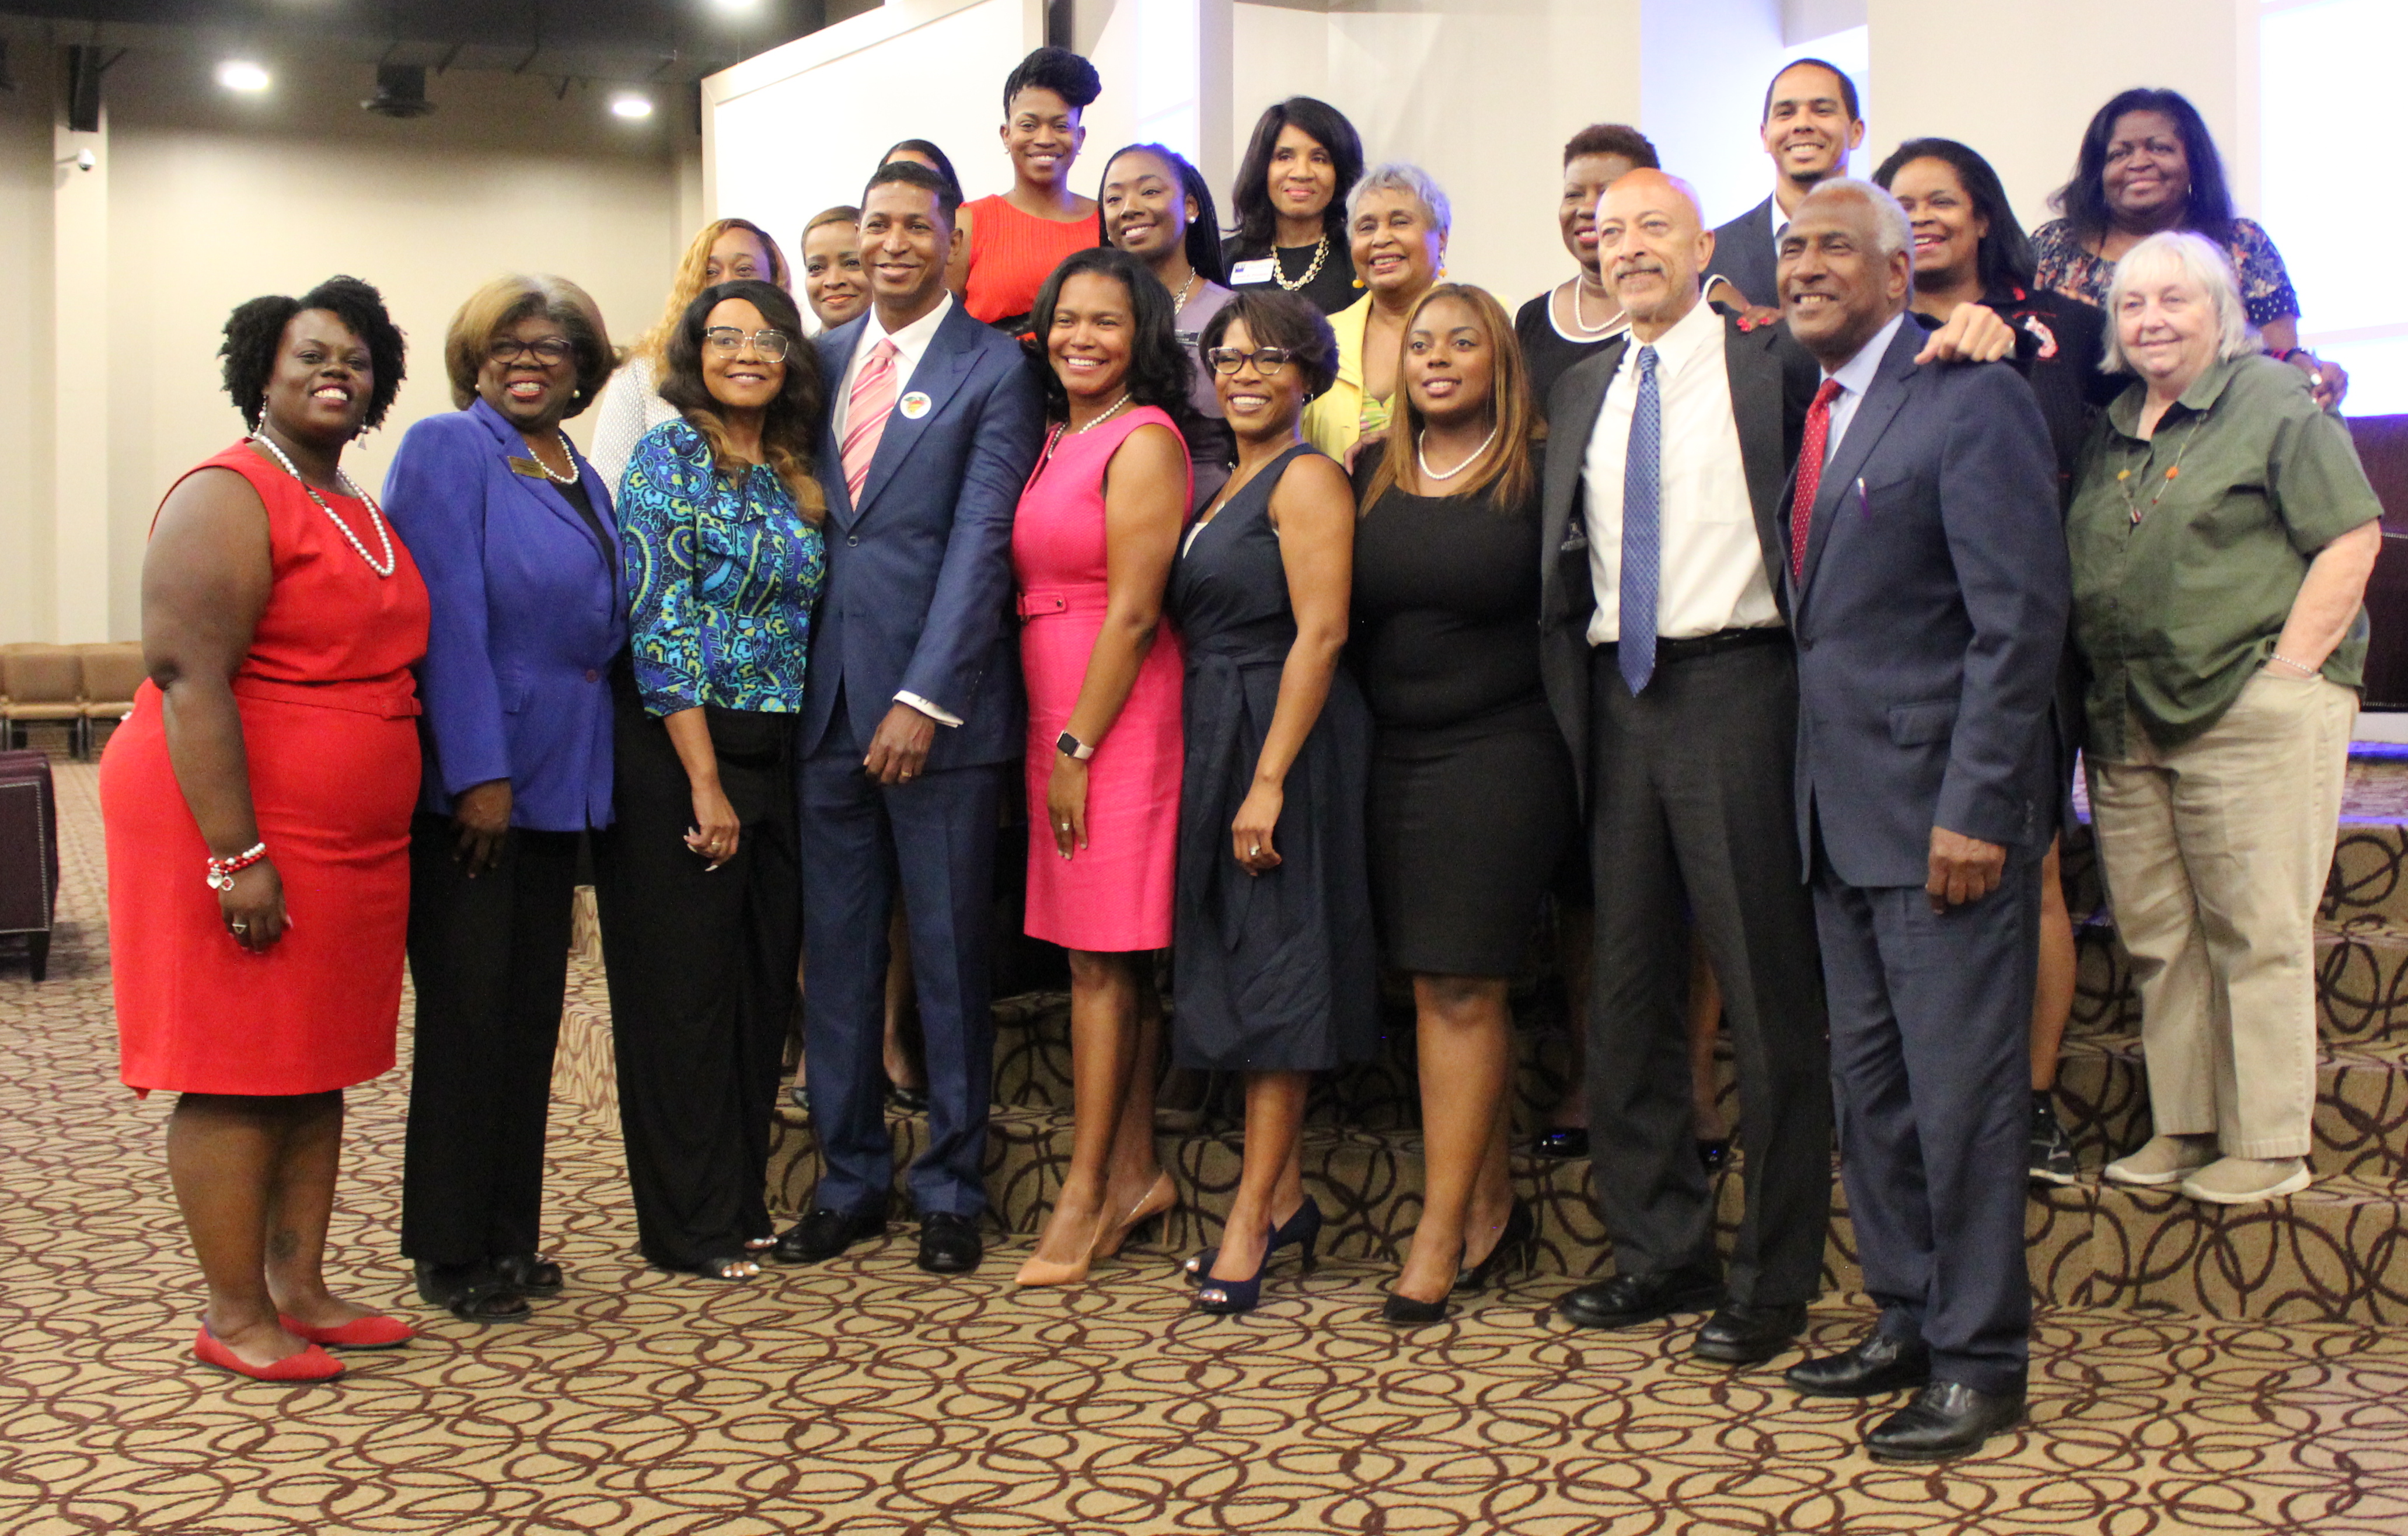 League of Women Voters, NAACP Host Forum for Commissioner Candidates